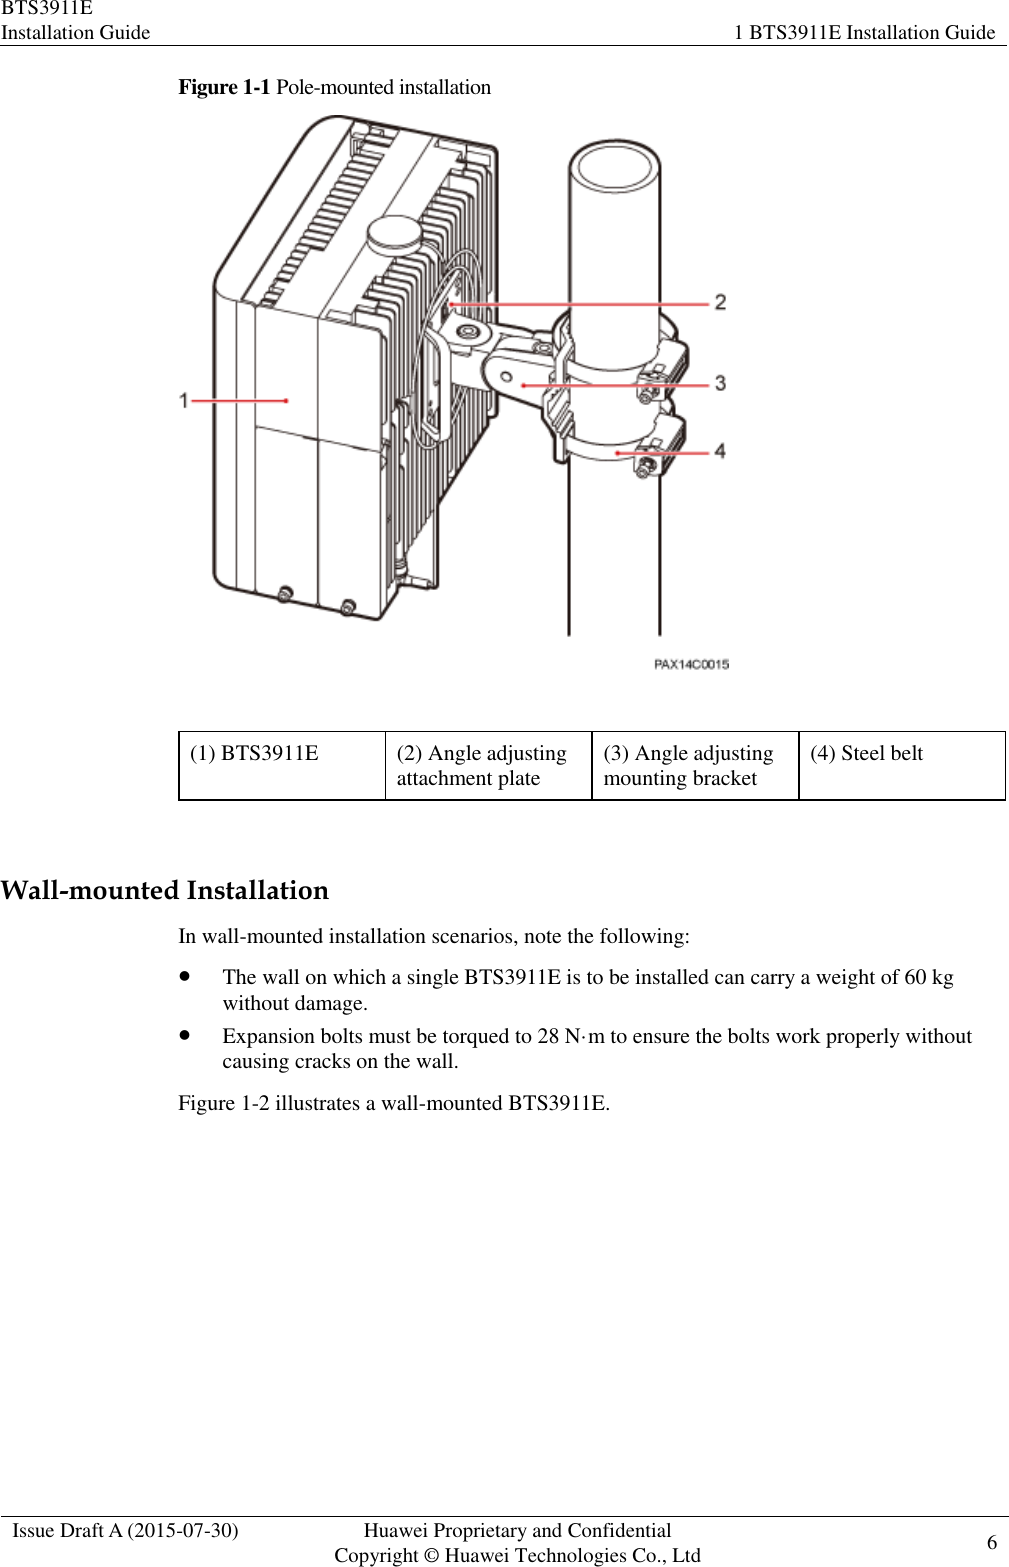 BTS3911E Installation Guide 1 BTS3911E Installation Guide  Issue Draft A (2015-07-30) Huawei Proprietary and Confidential           Copyright © Huawei Technologies Co., Ltd 6    Figure 1-1 Pole-mounted installation   (1) BTS3911E (2) Angle adjusting attachment plate (3) Angle adjusting mounting bracket (4) Steel belt  Wall-mounted Installation In wall-mounted installation scenarios, note the following:  The wall on which a single BTS3911E is to be installed can carry a weight of 60 kg without damage.  Expansion bolts must be torqued to 28 N·m to ensure the bolts work properly without causing cracks on the wall. Figure 1-2 illustrates a wall-mounted BTS3911E. 